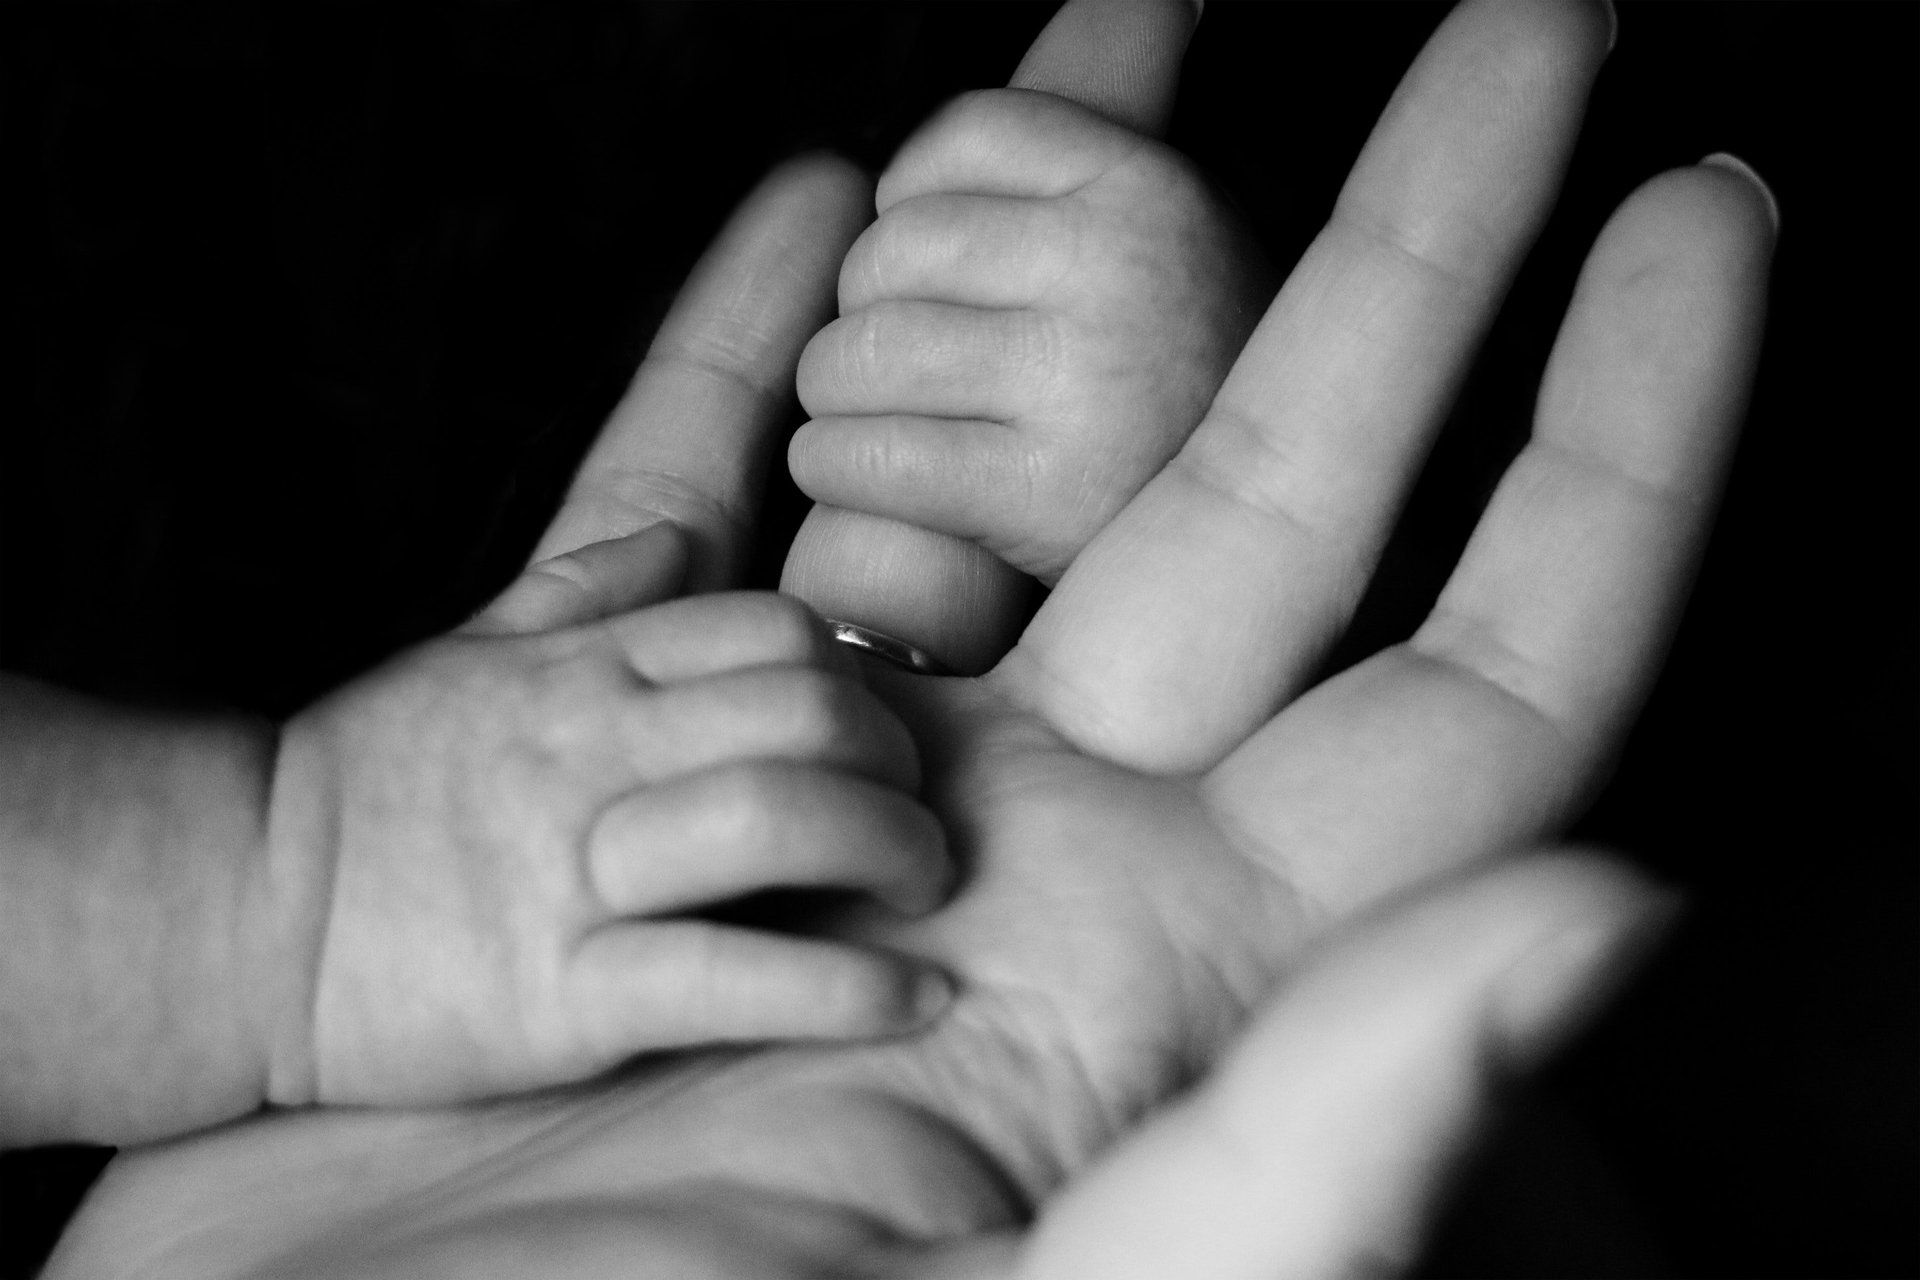 A black and white photo of a person holding a baby 's hand.